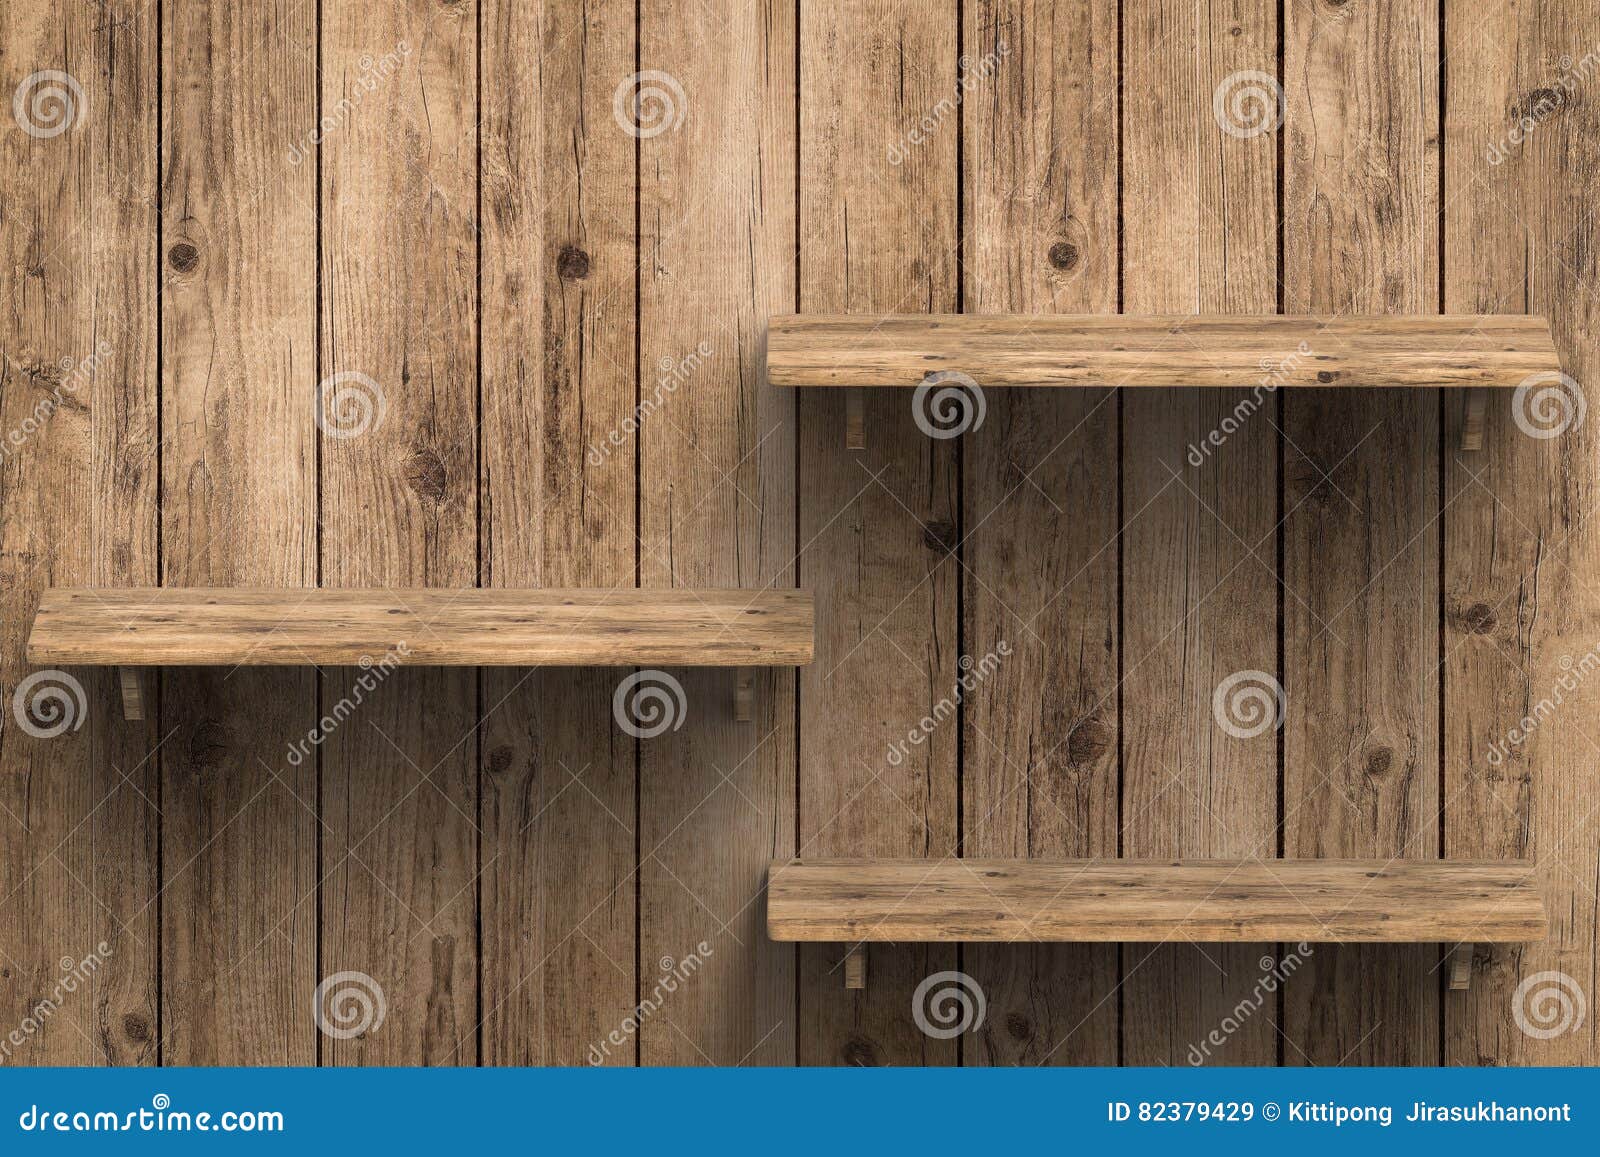 three wooden shelves on wall